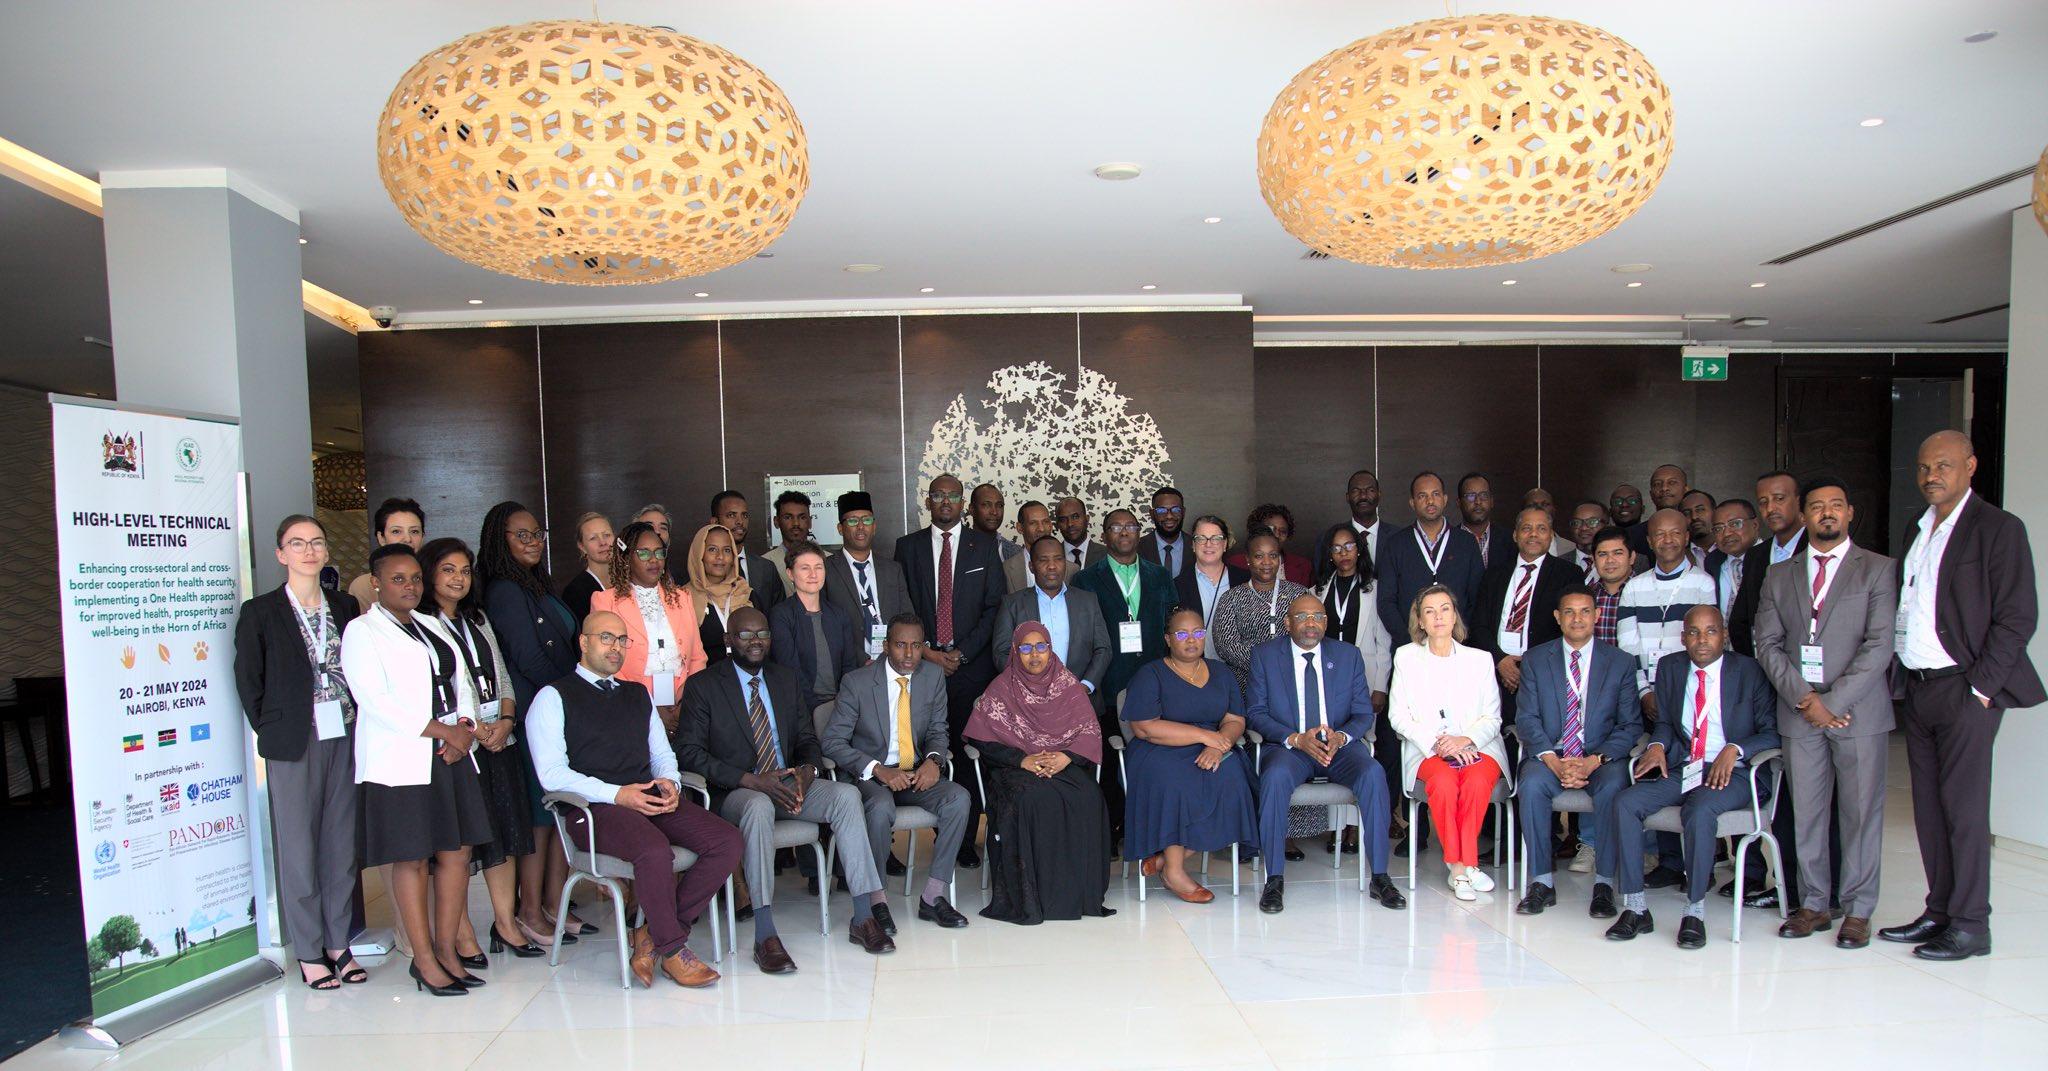 Enhancing Cross-Sectoral and Cross-Border Cooperation for Health Security, Implementing a One Health Approach for Improved Health, Prosperity, and Well-Being in the Horn of Africa.